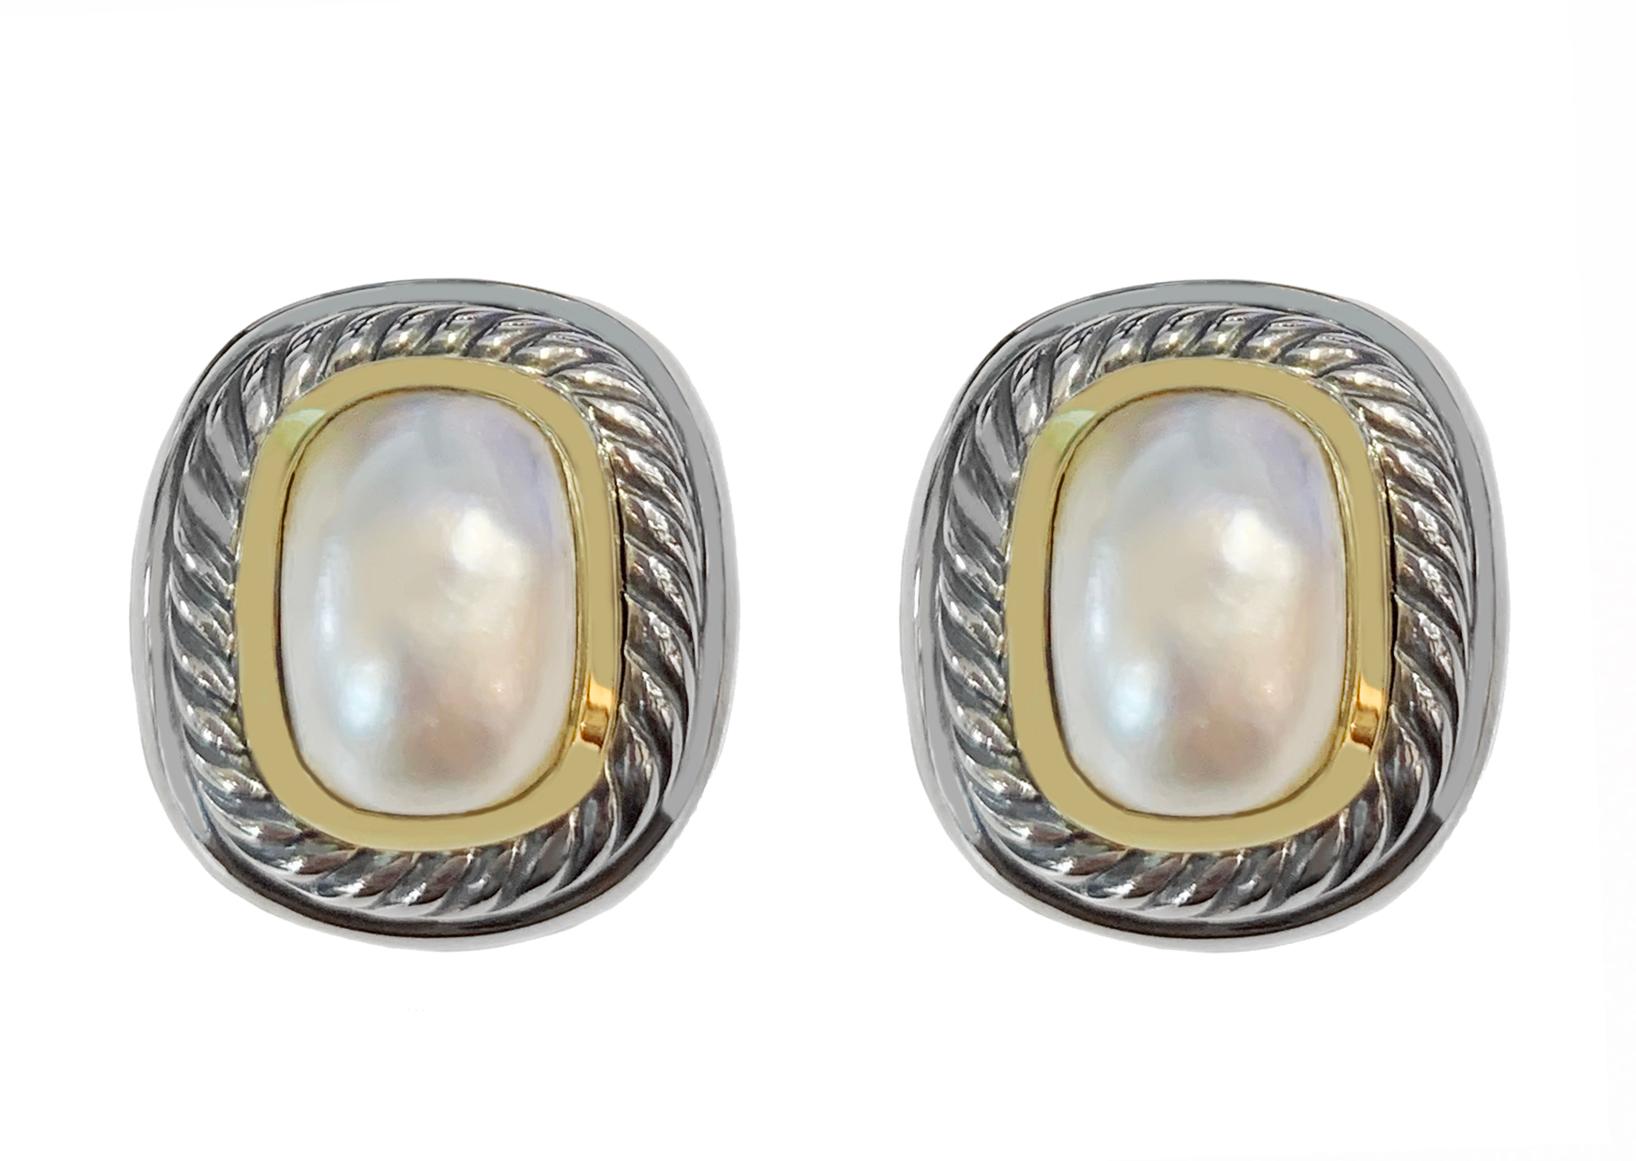 -Mint condition
-14k Yellow Gold & Sterling silver
-Pearl: 0.3x0.4